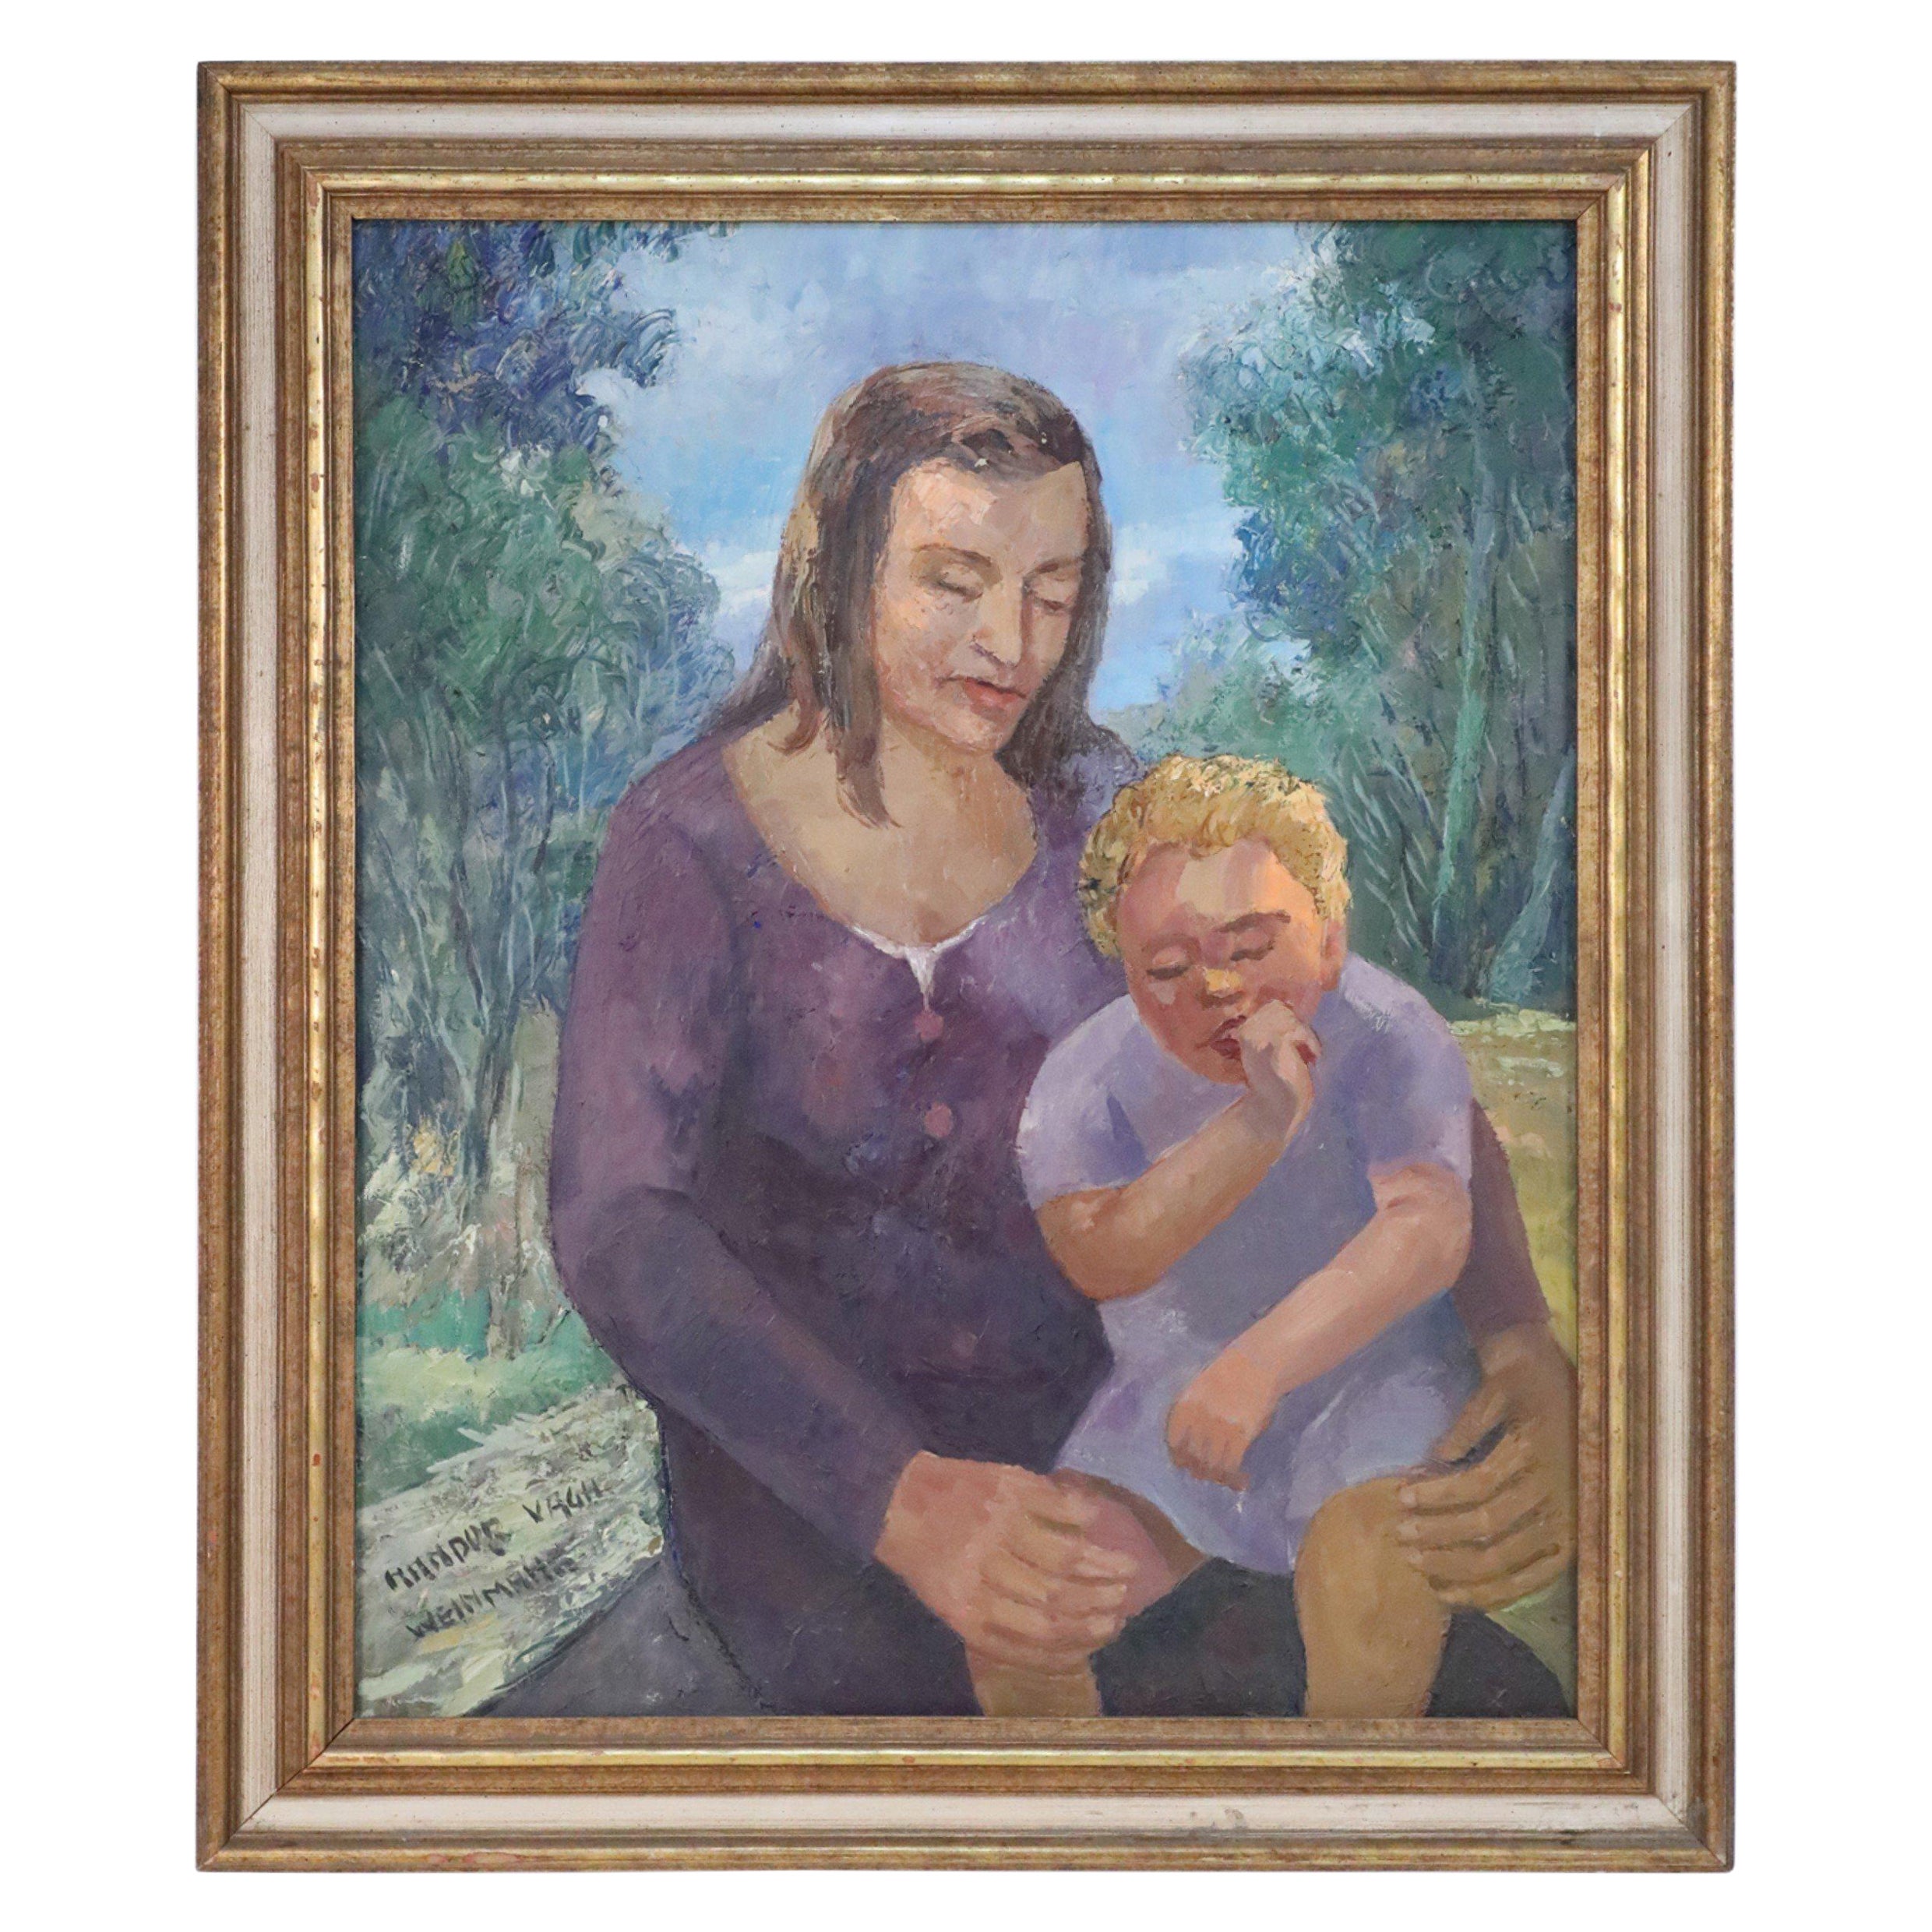 Framed Woman with Child Portrait Oil Painting For Sale